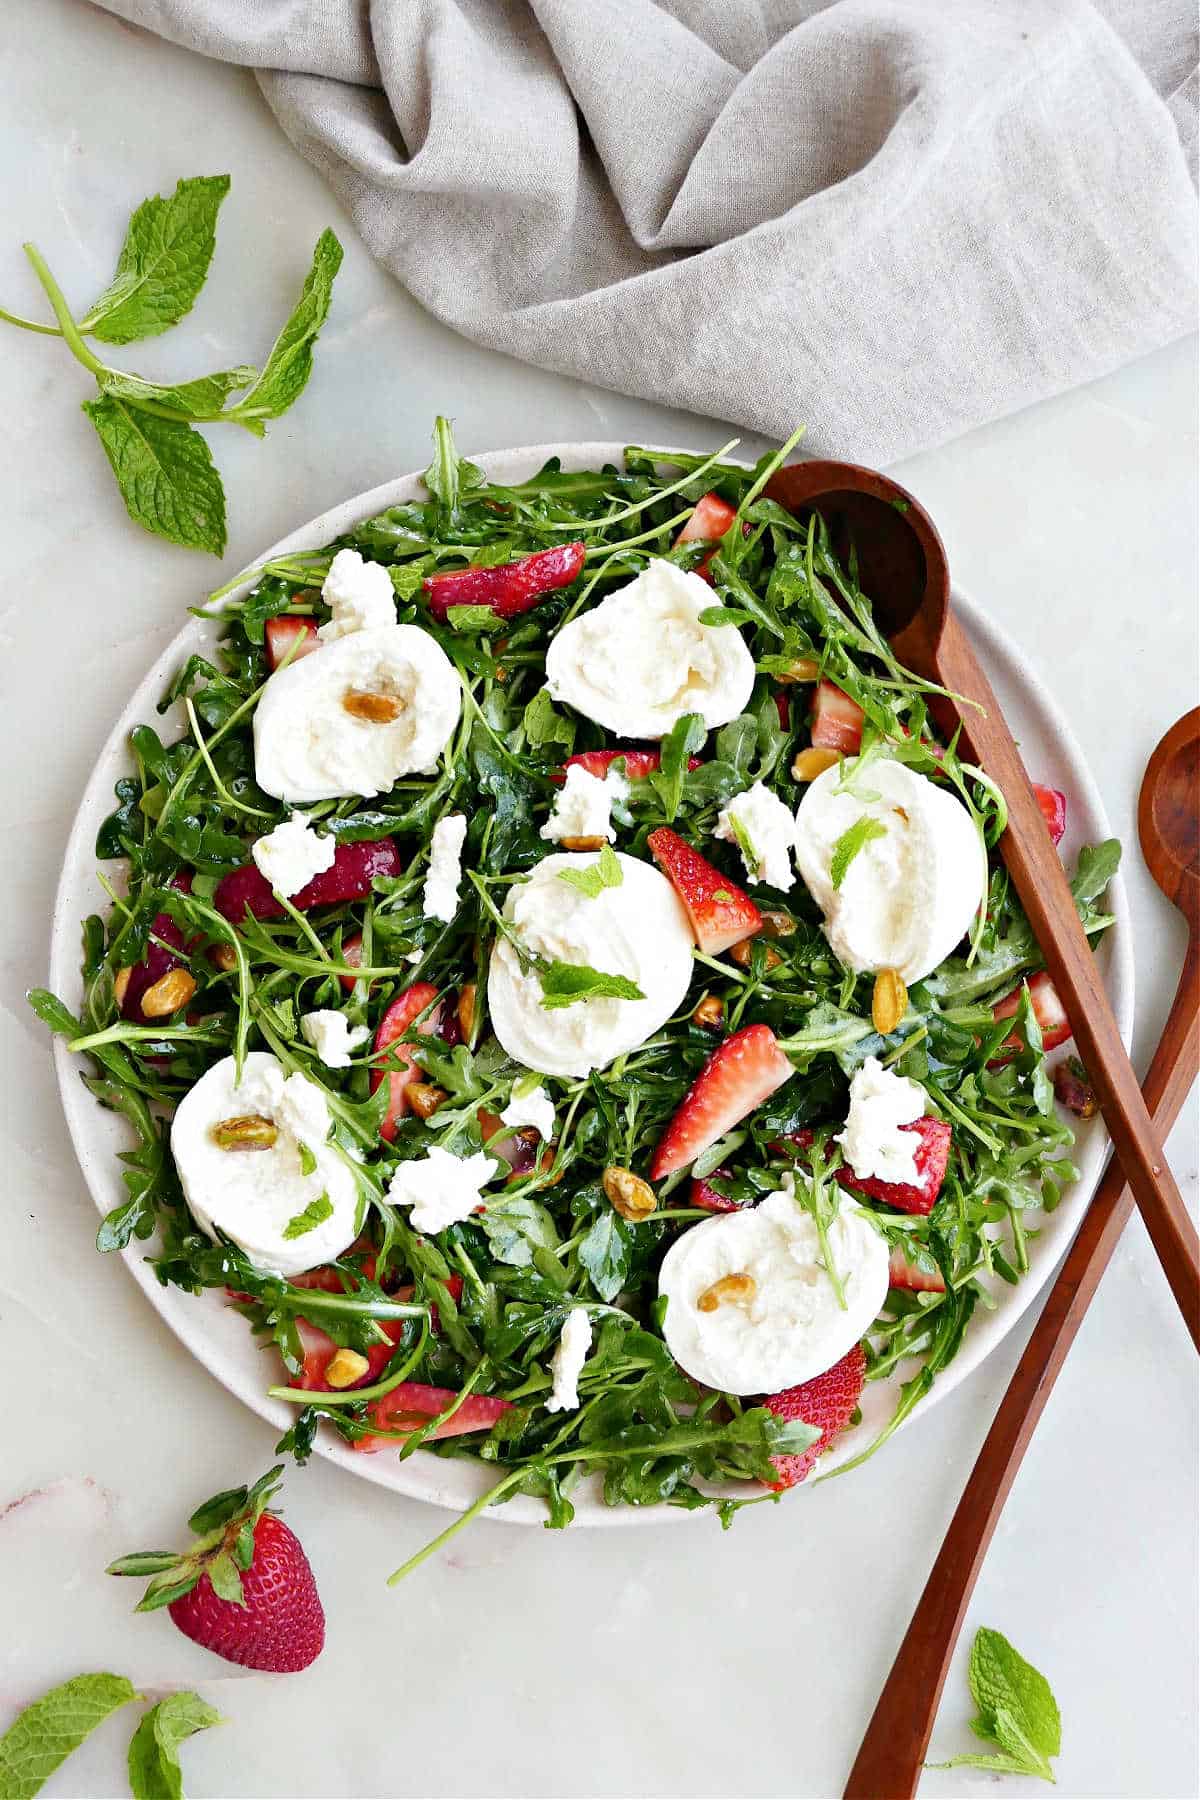 arugula salad with burrata and berries on a serving plate with wooden tongs